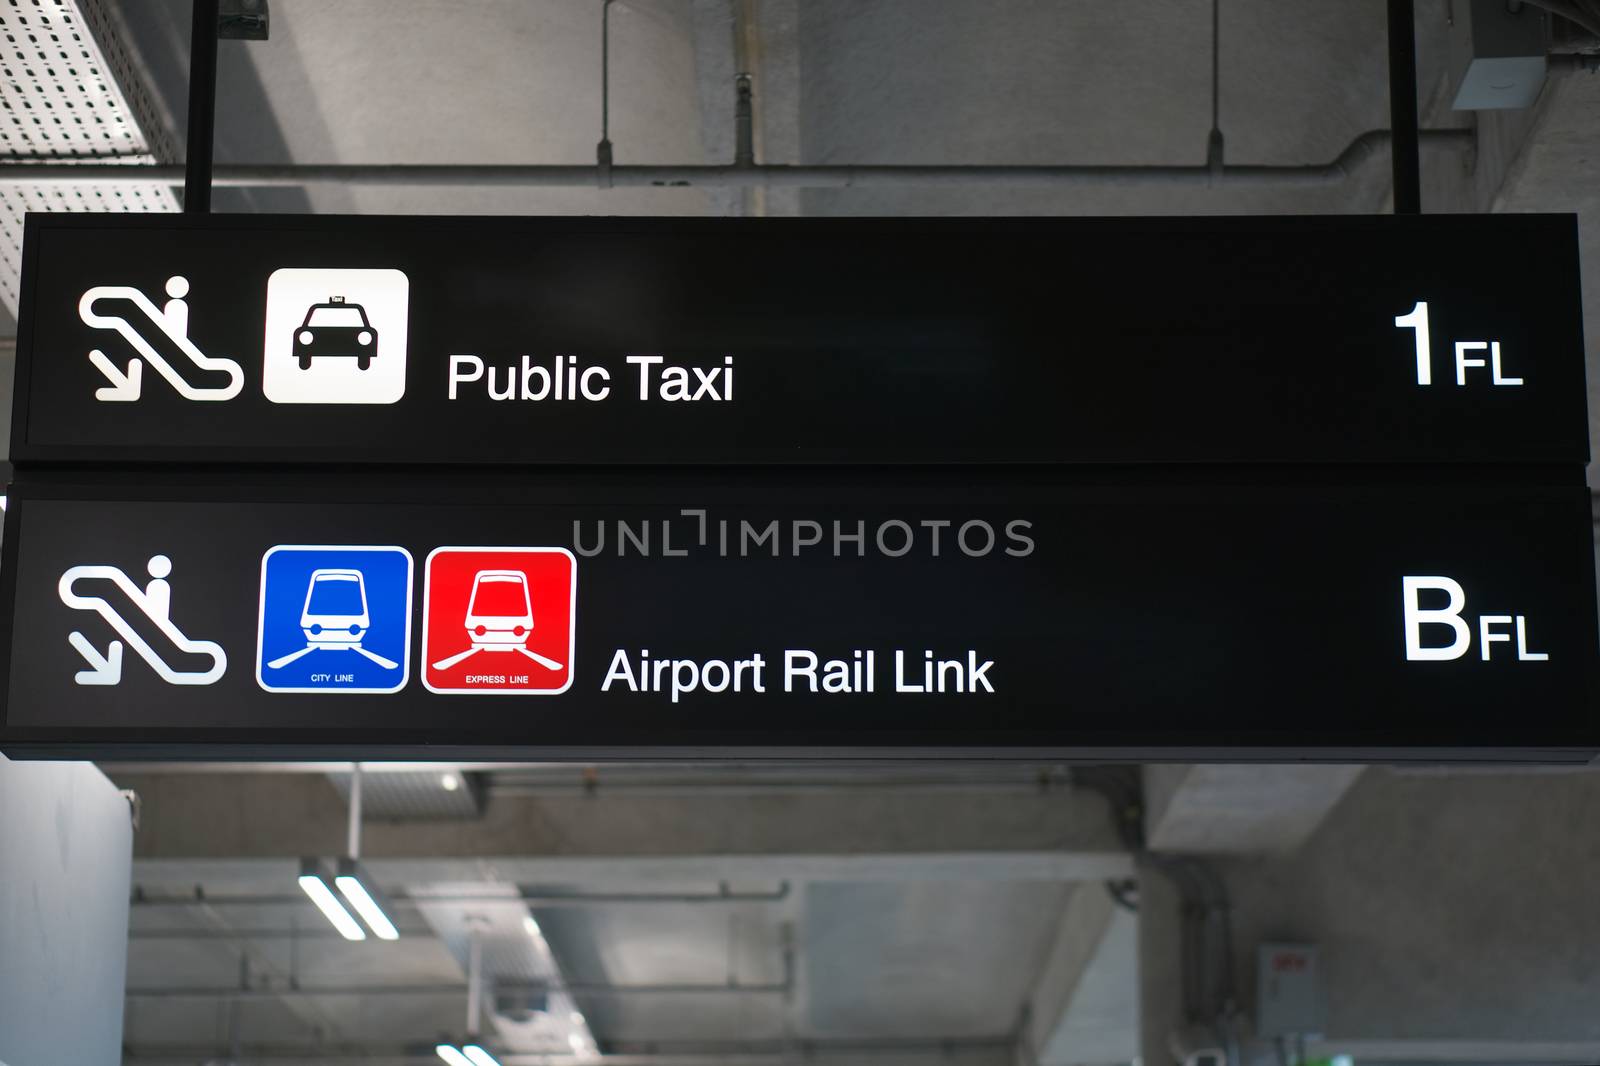 Public taxi and Airport rail link information board sign with white character on black background at international airport terminal.